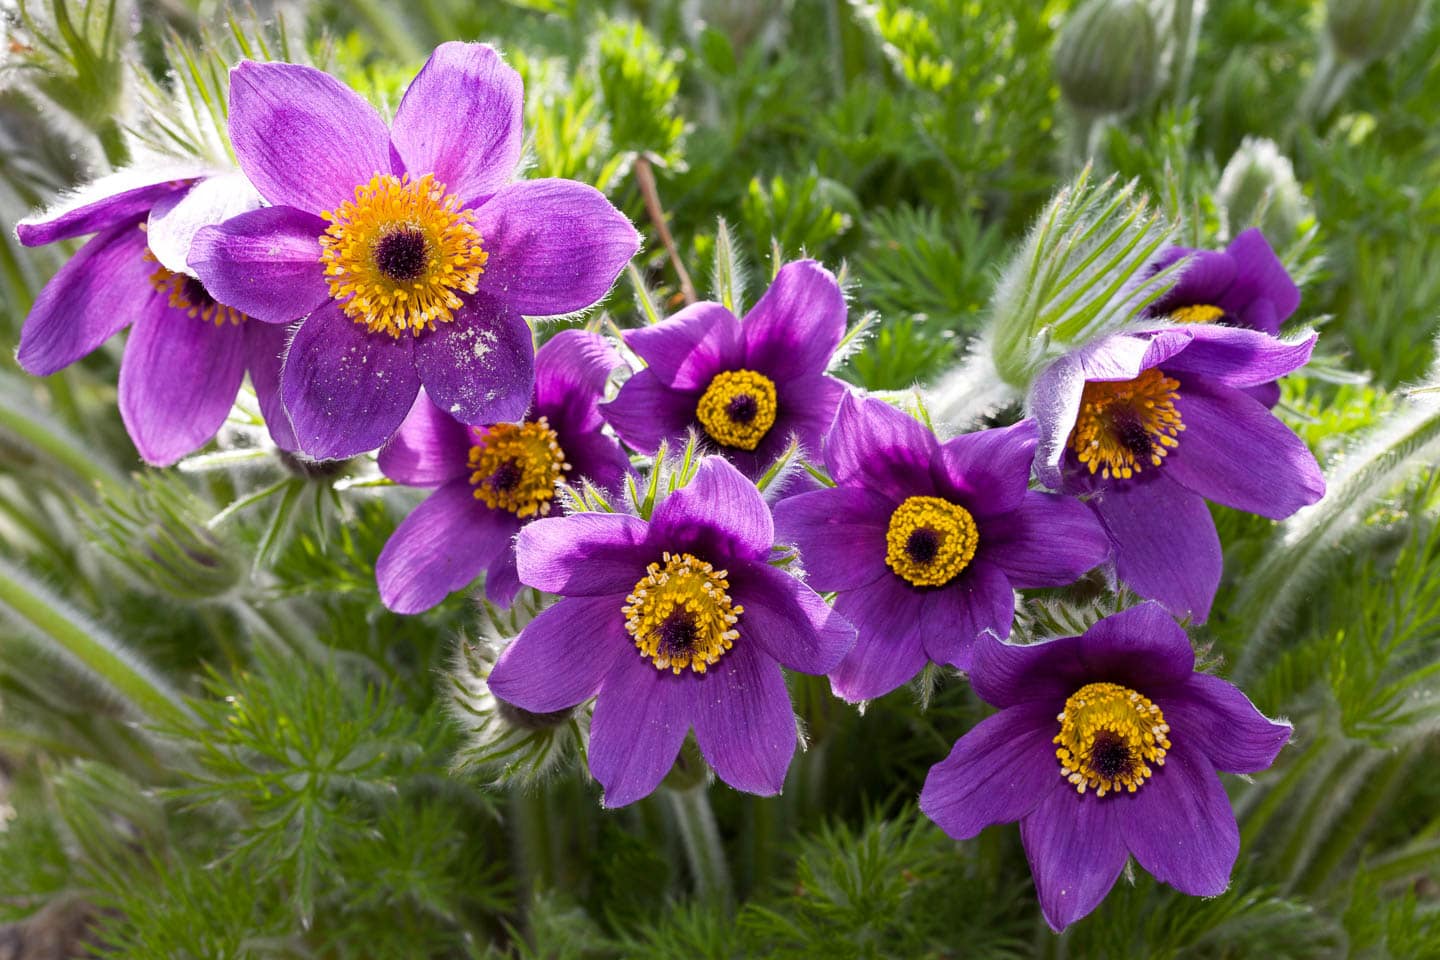 purple pasque flowers with yellow centers